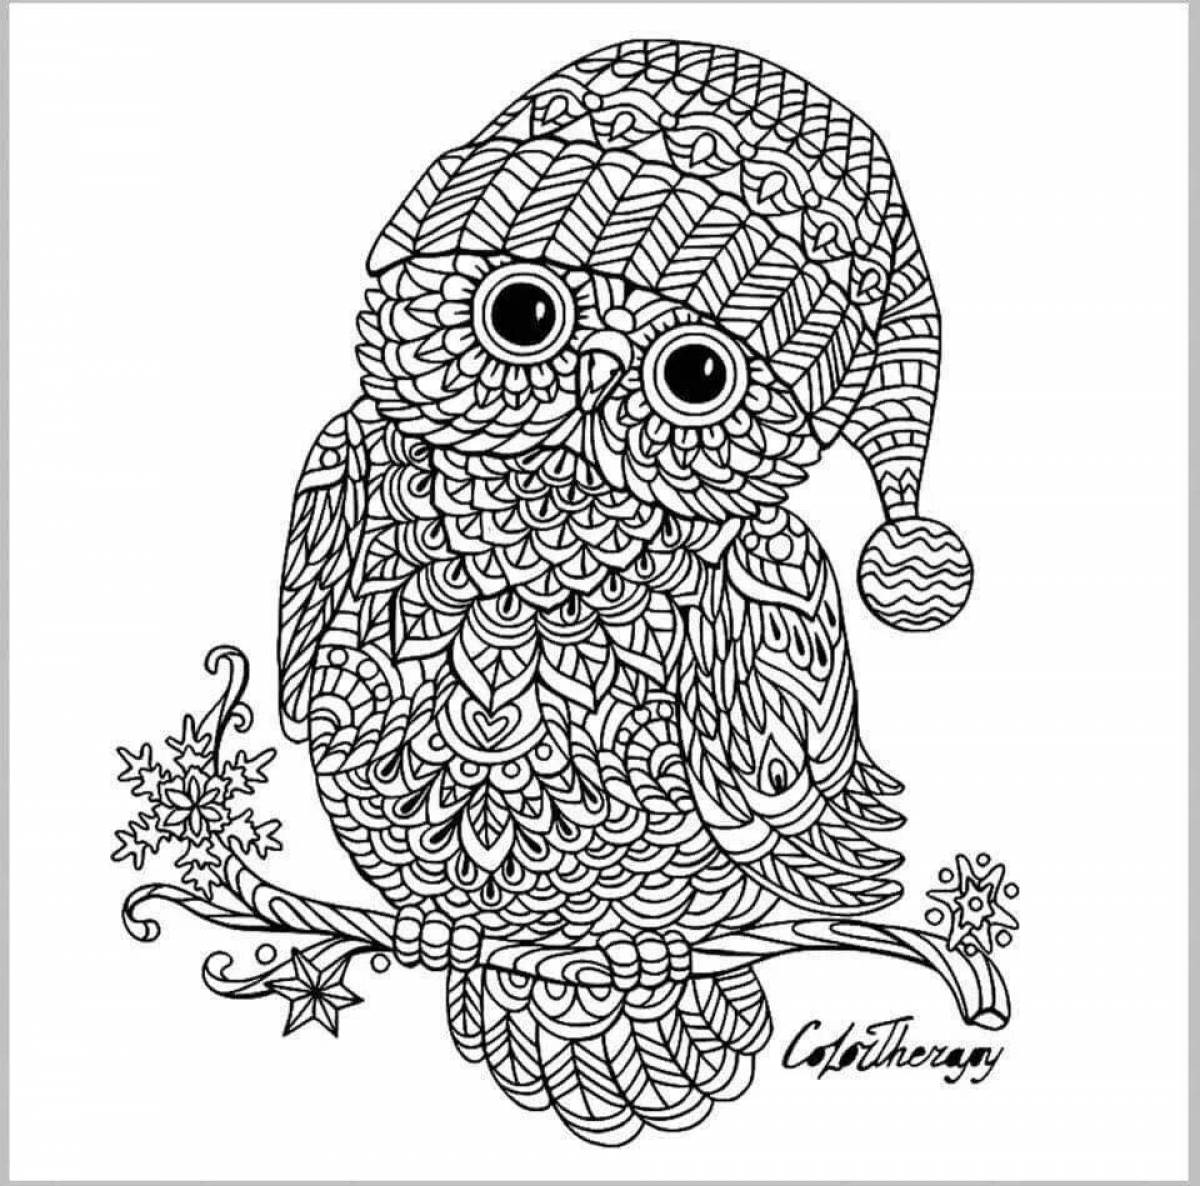 Soulful anti-stress coloring book 15 years